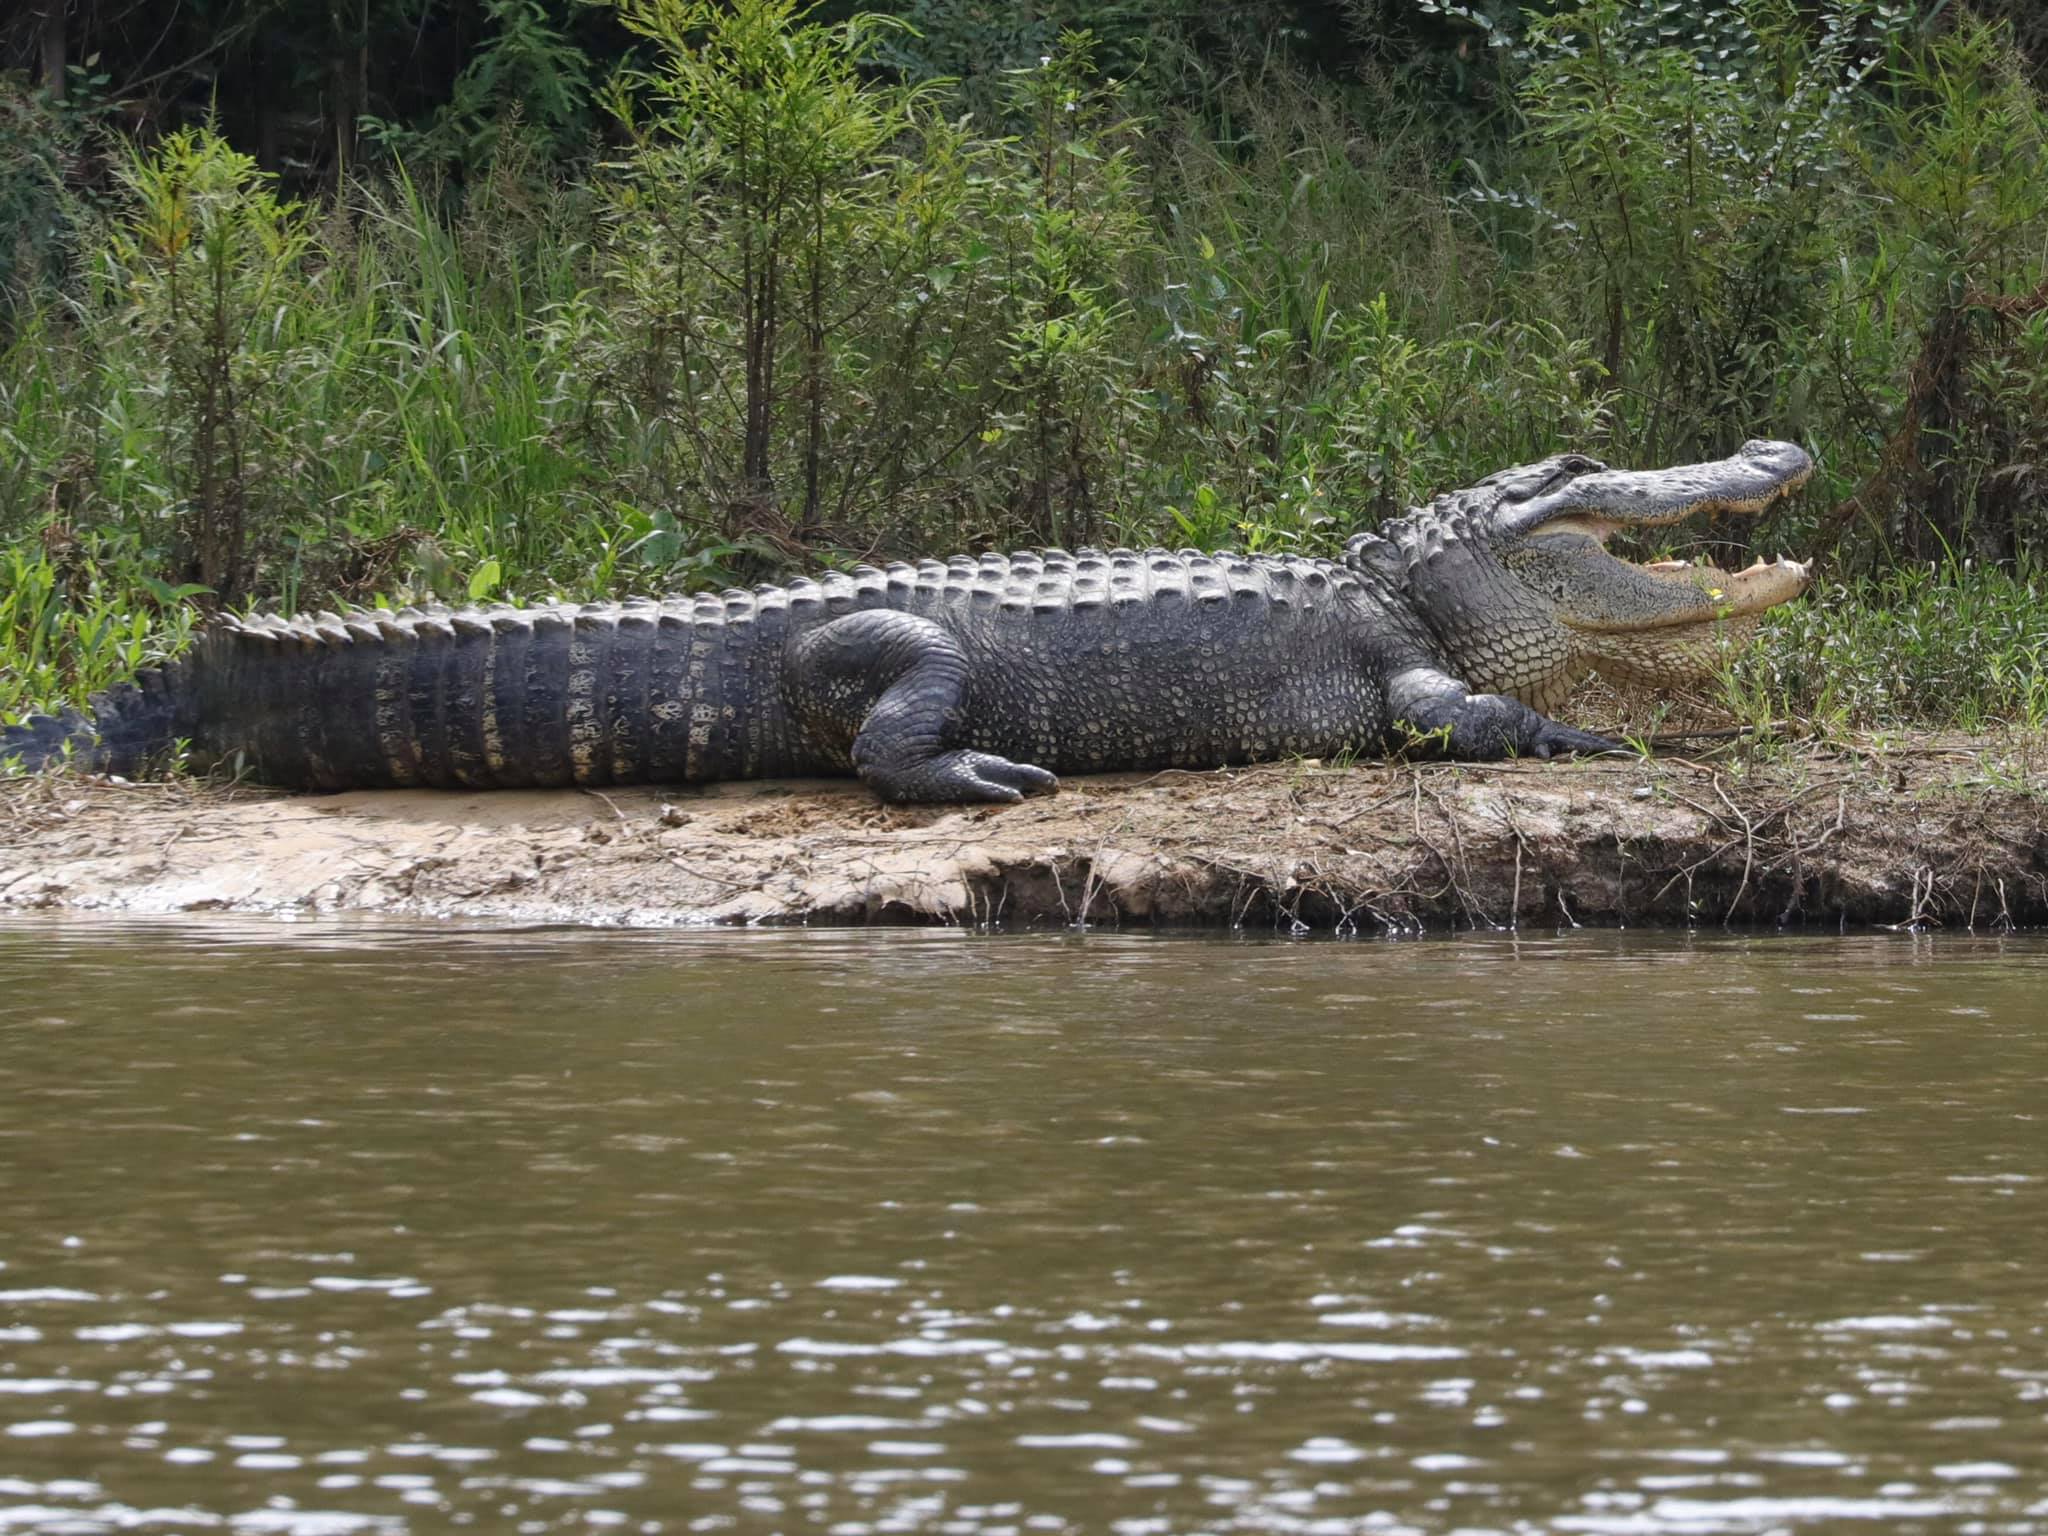 An alligator laying on land with its mouth open.